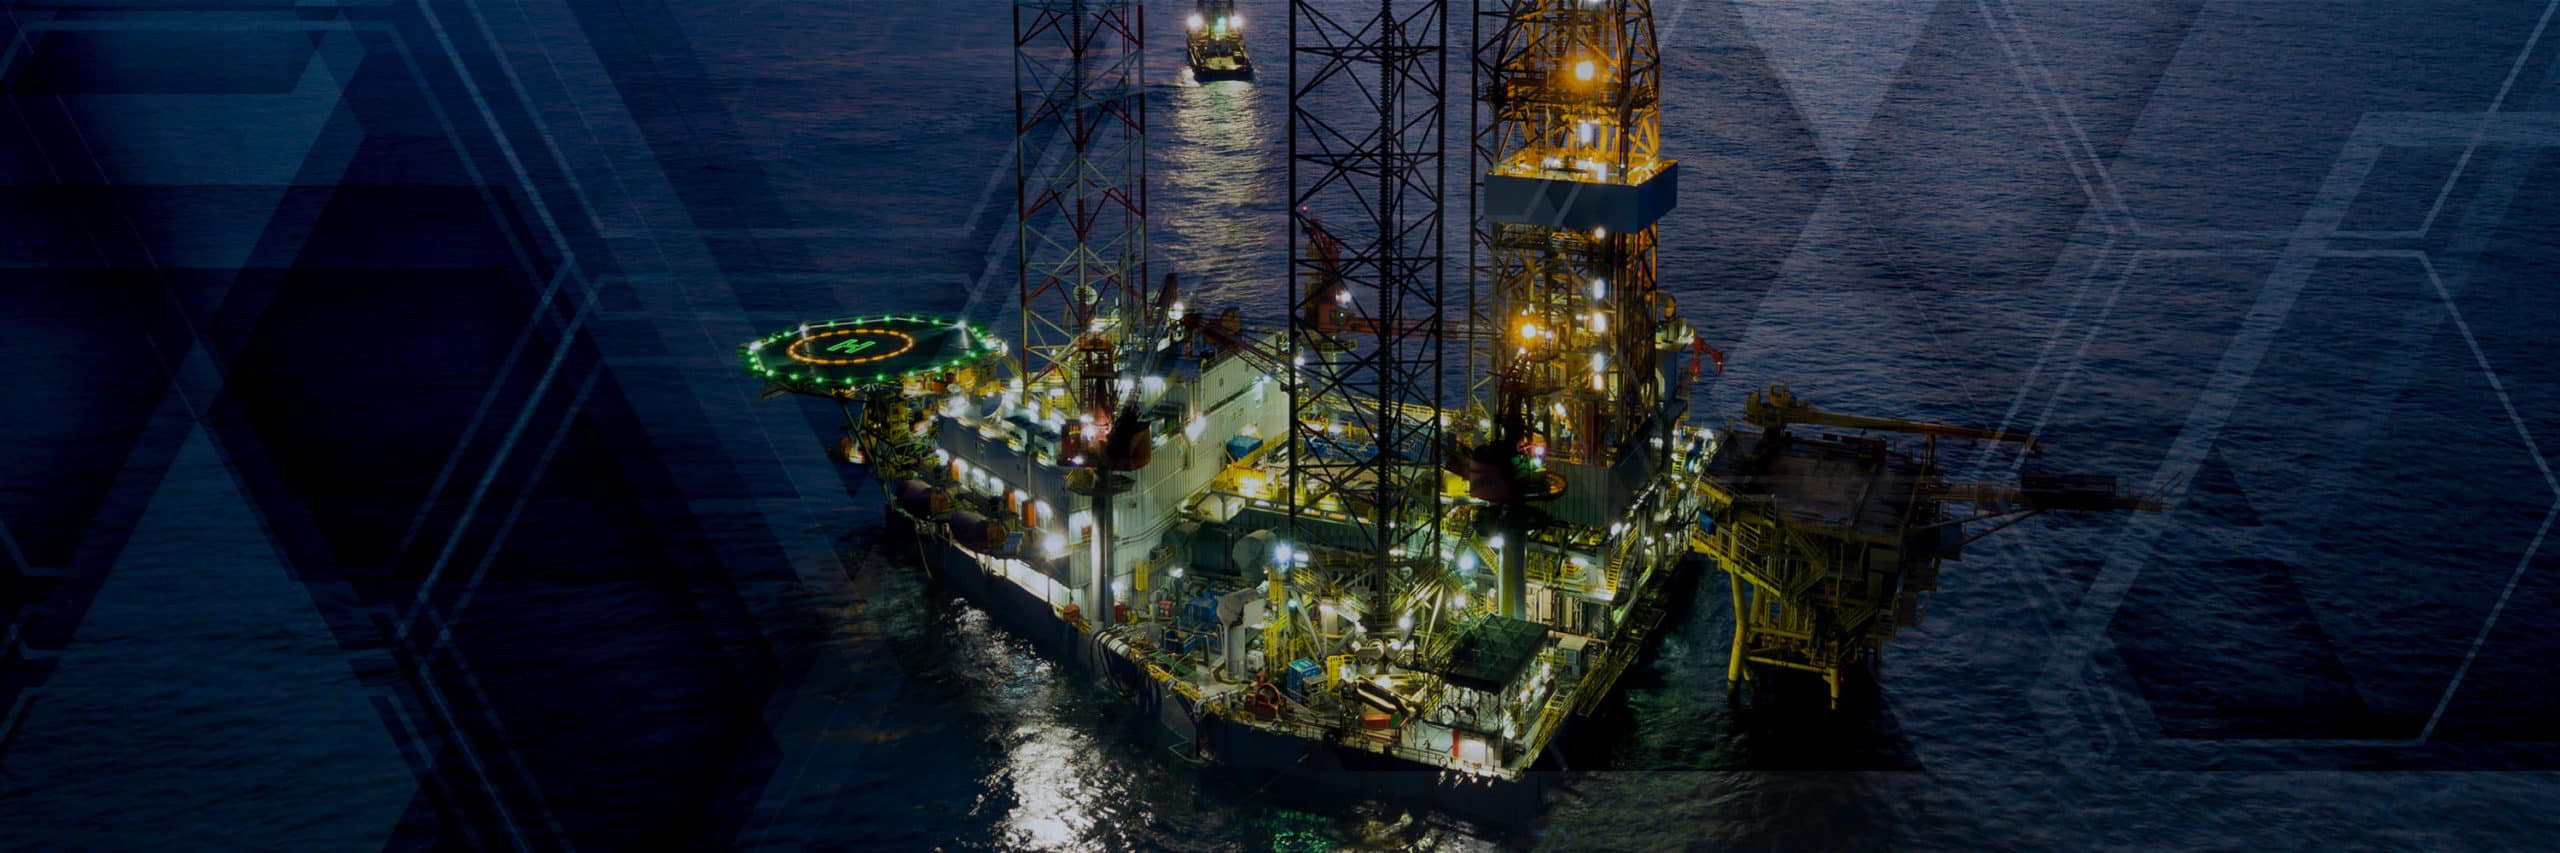 Offshore rig utilisation rate higher than reported as market continues to tighten, Westwood says